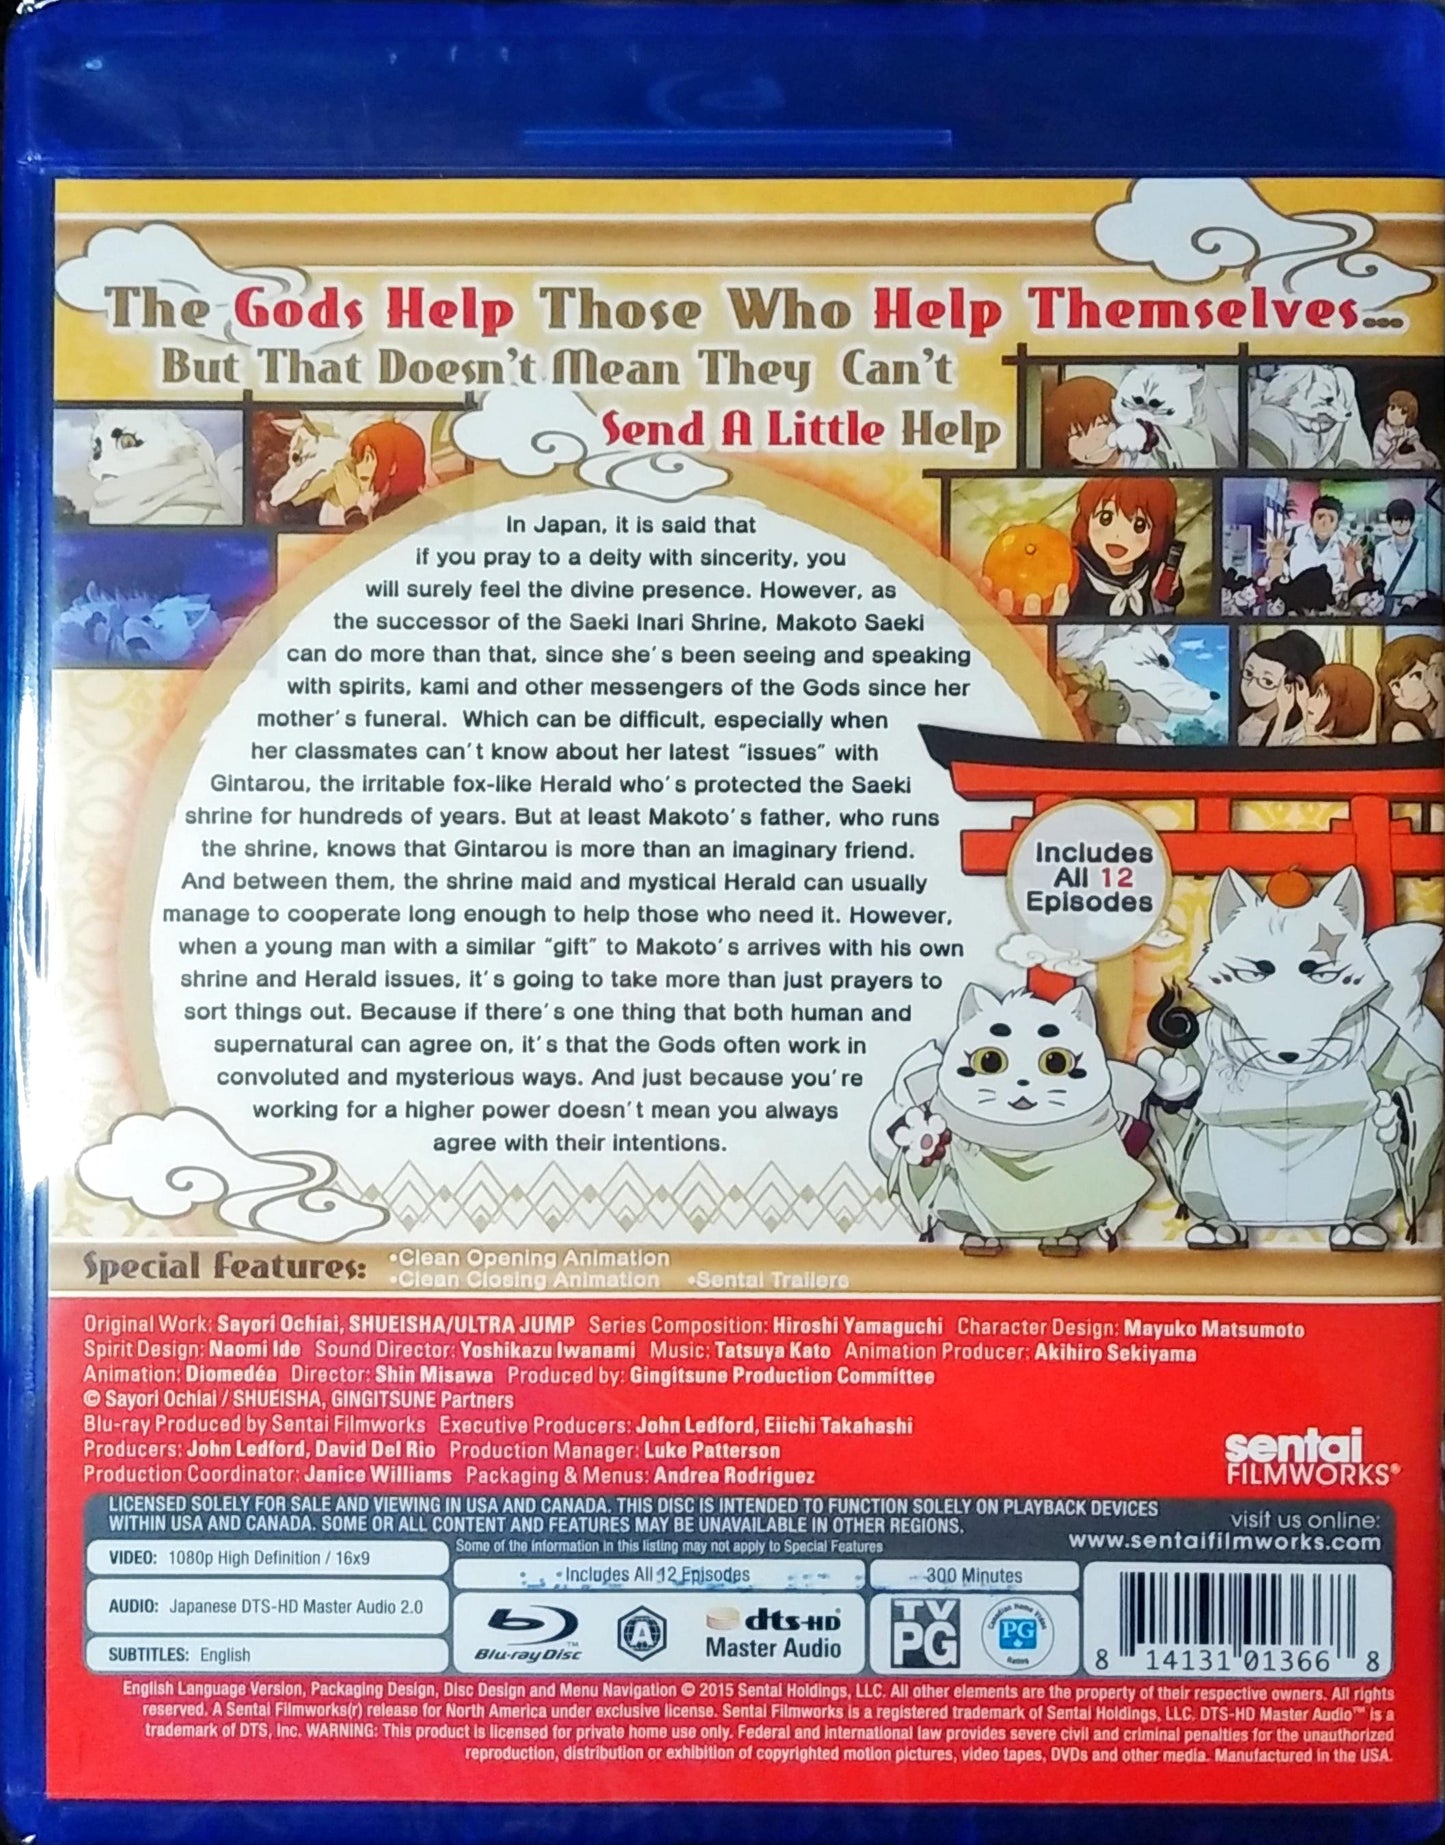 Gingitsune Messenger Fox of the Gods Blu-ray Complete Collection Sealed